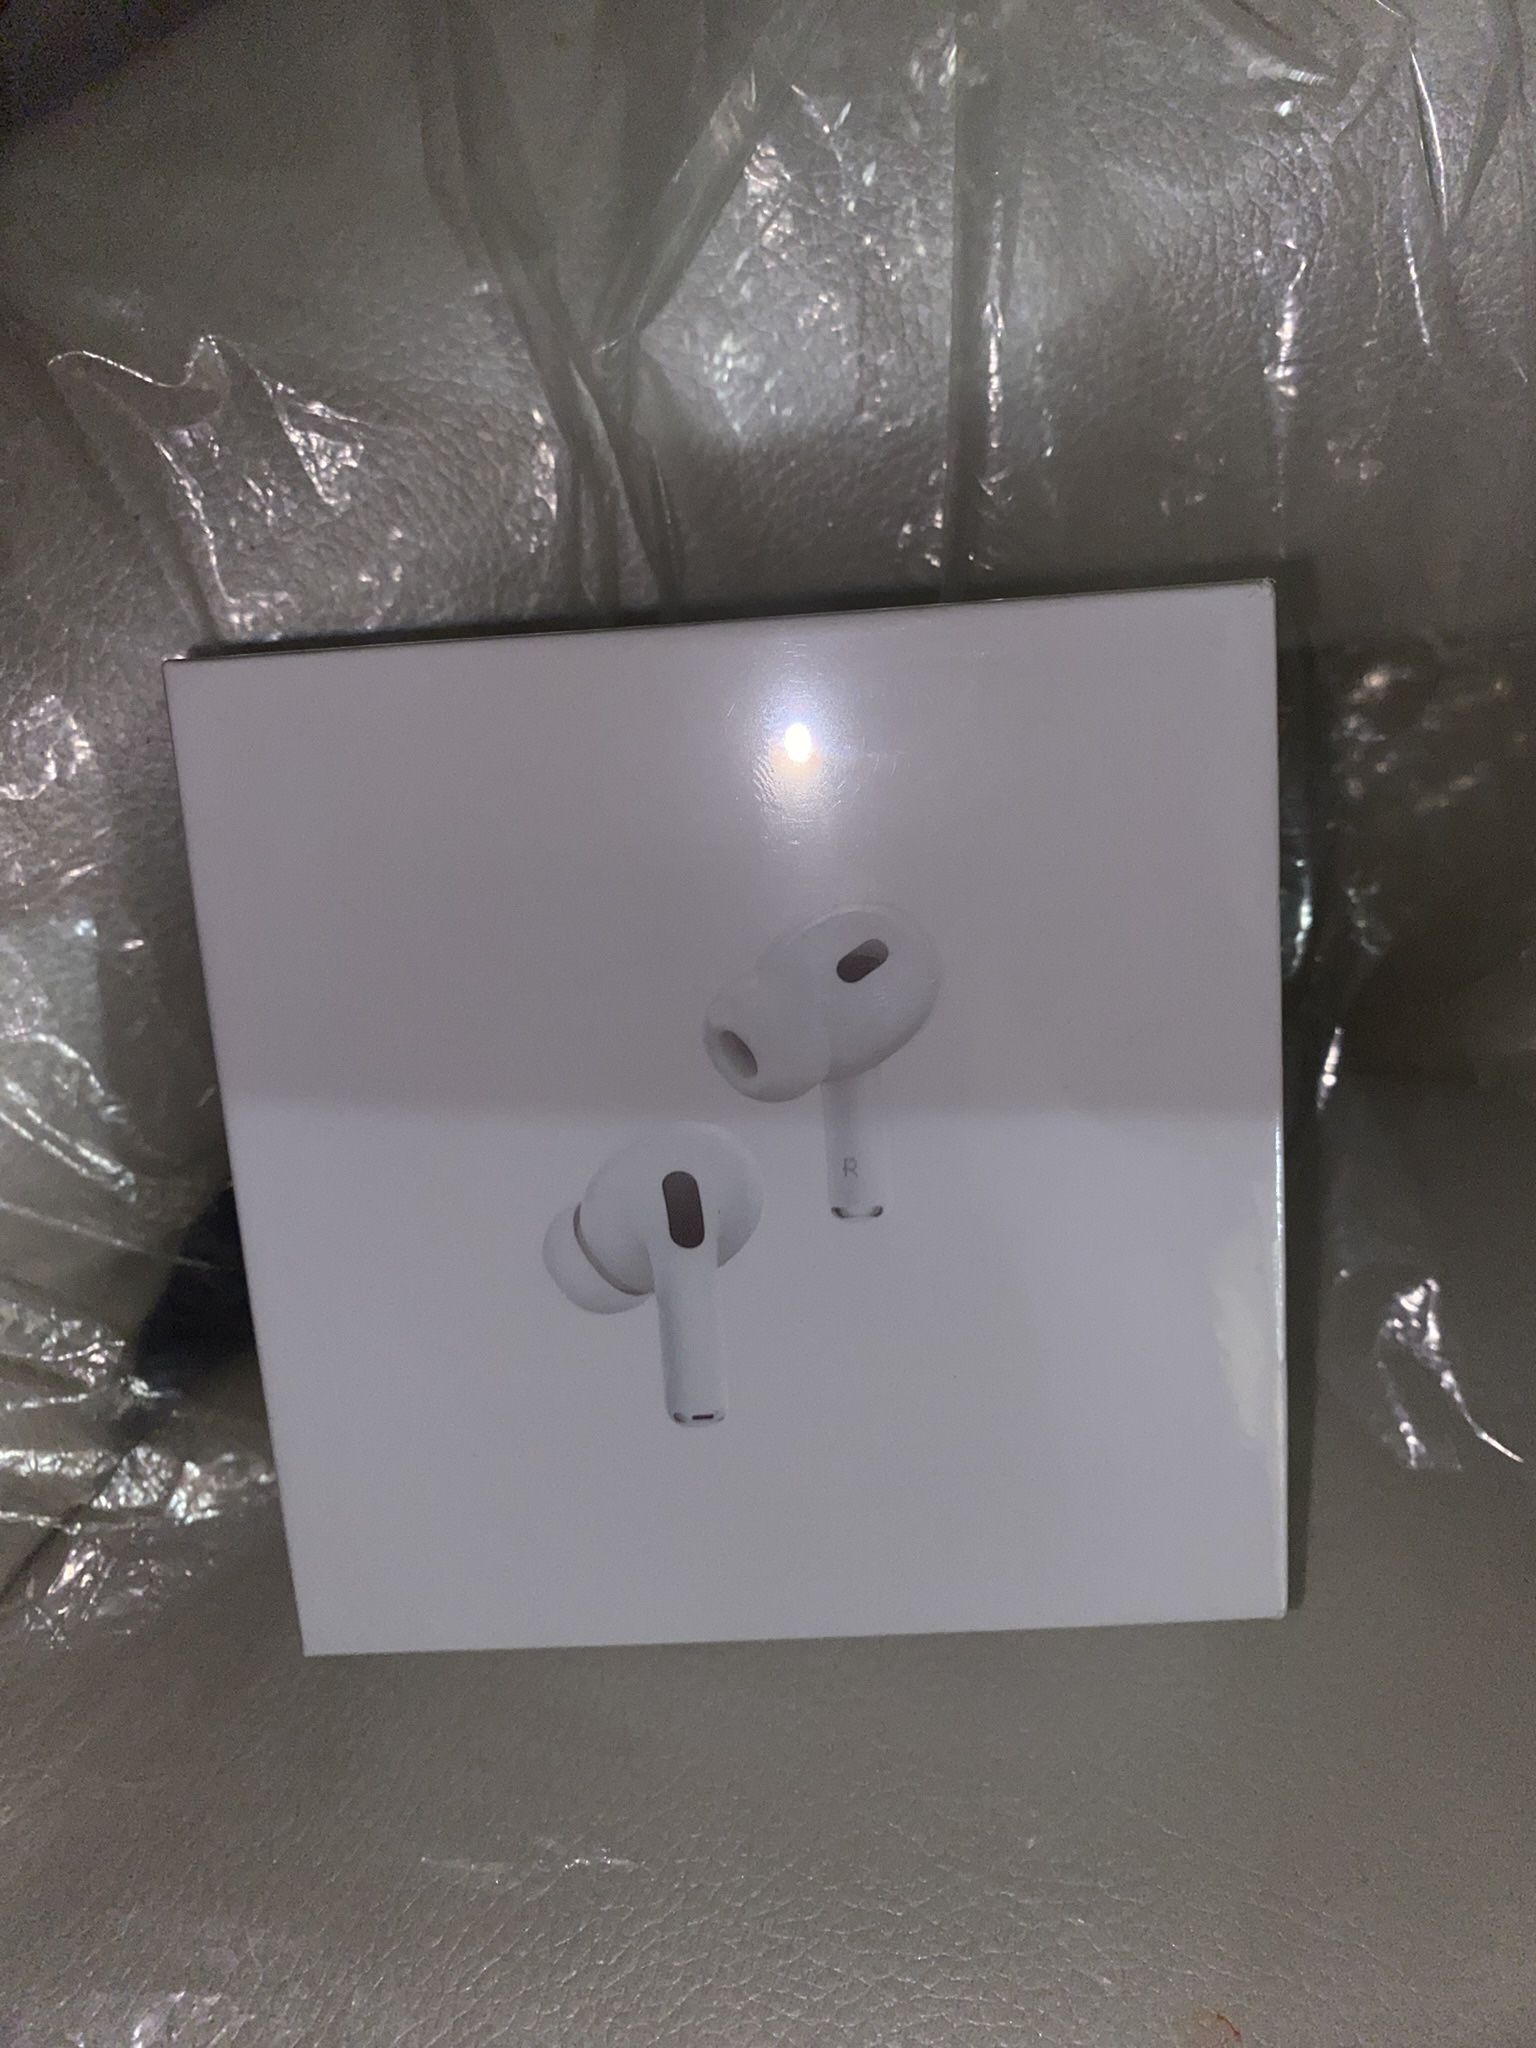 airpods pro 2 new in box sealed